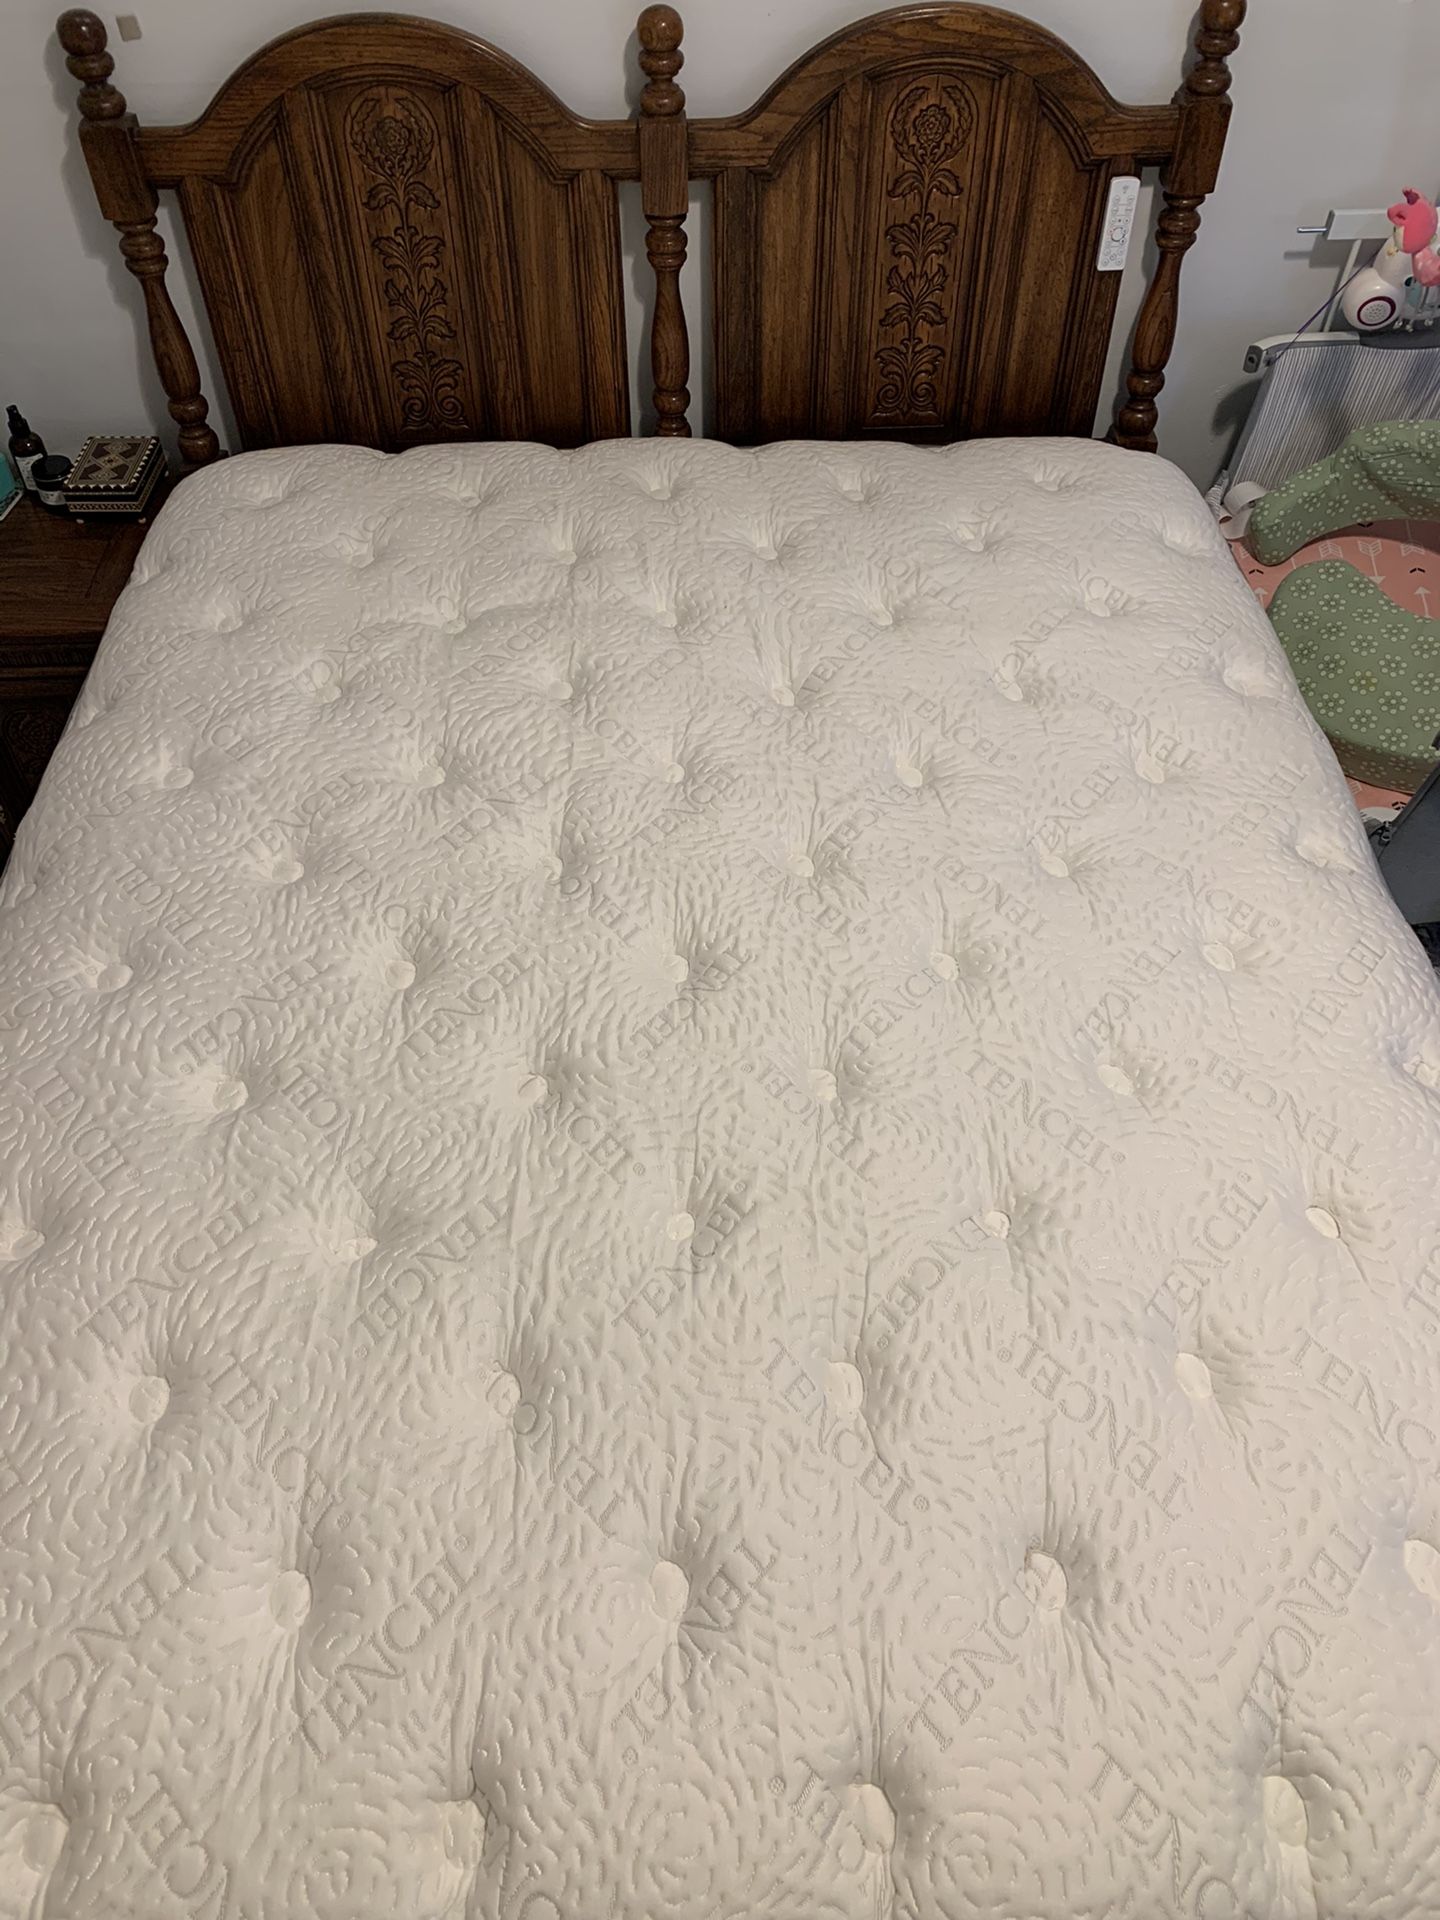 Can deliver Queen mattress and box springs!